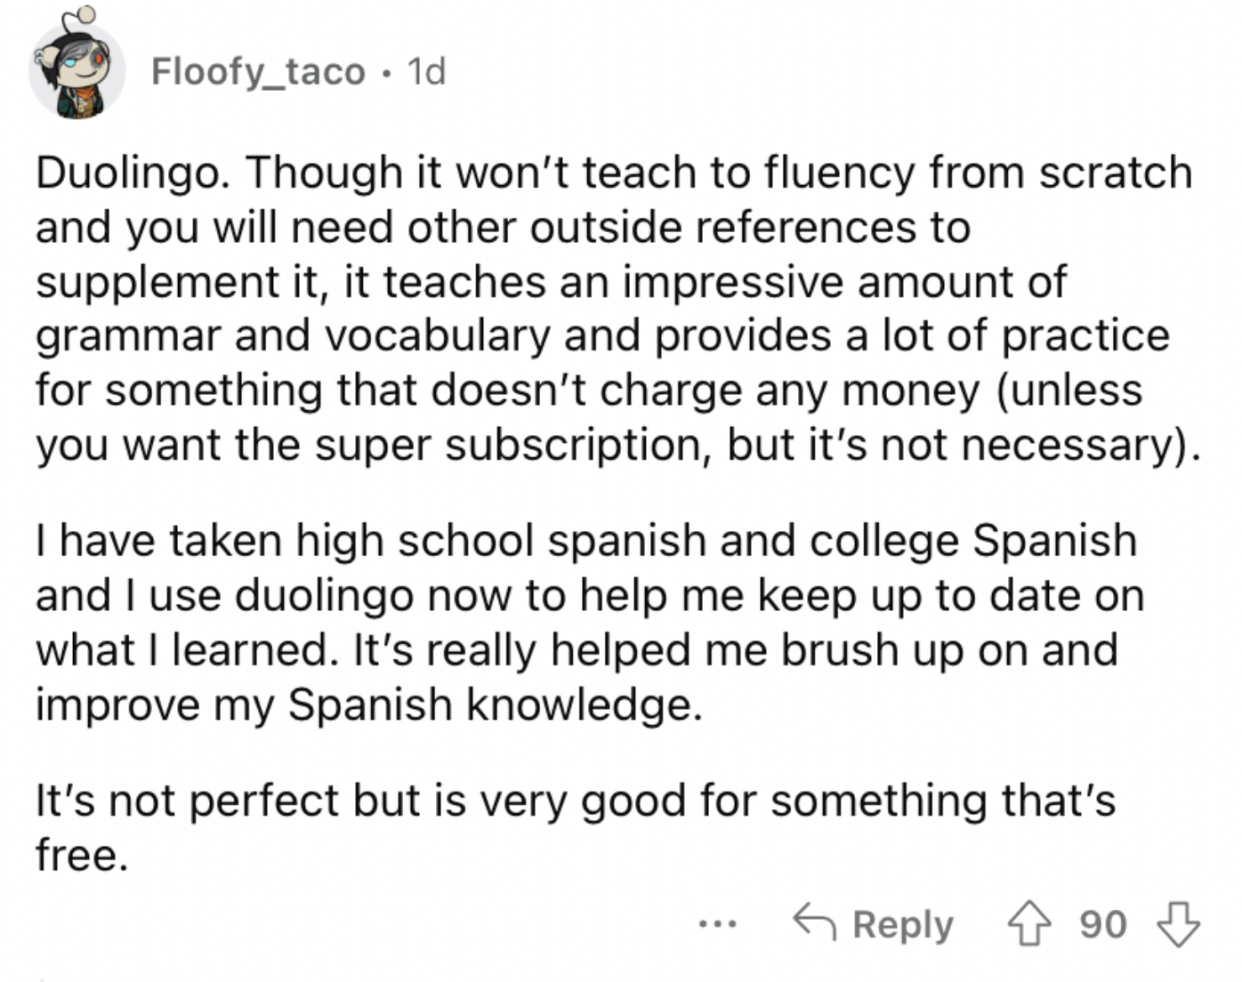 Reddit screenshot about Duolingo being a great app.